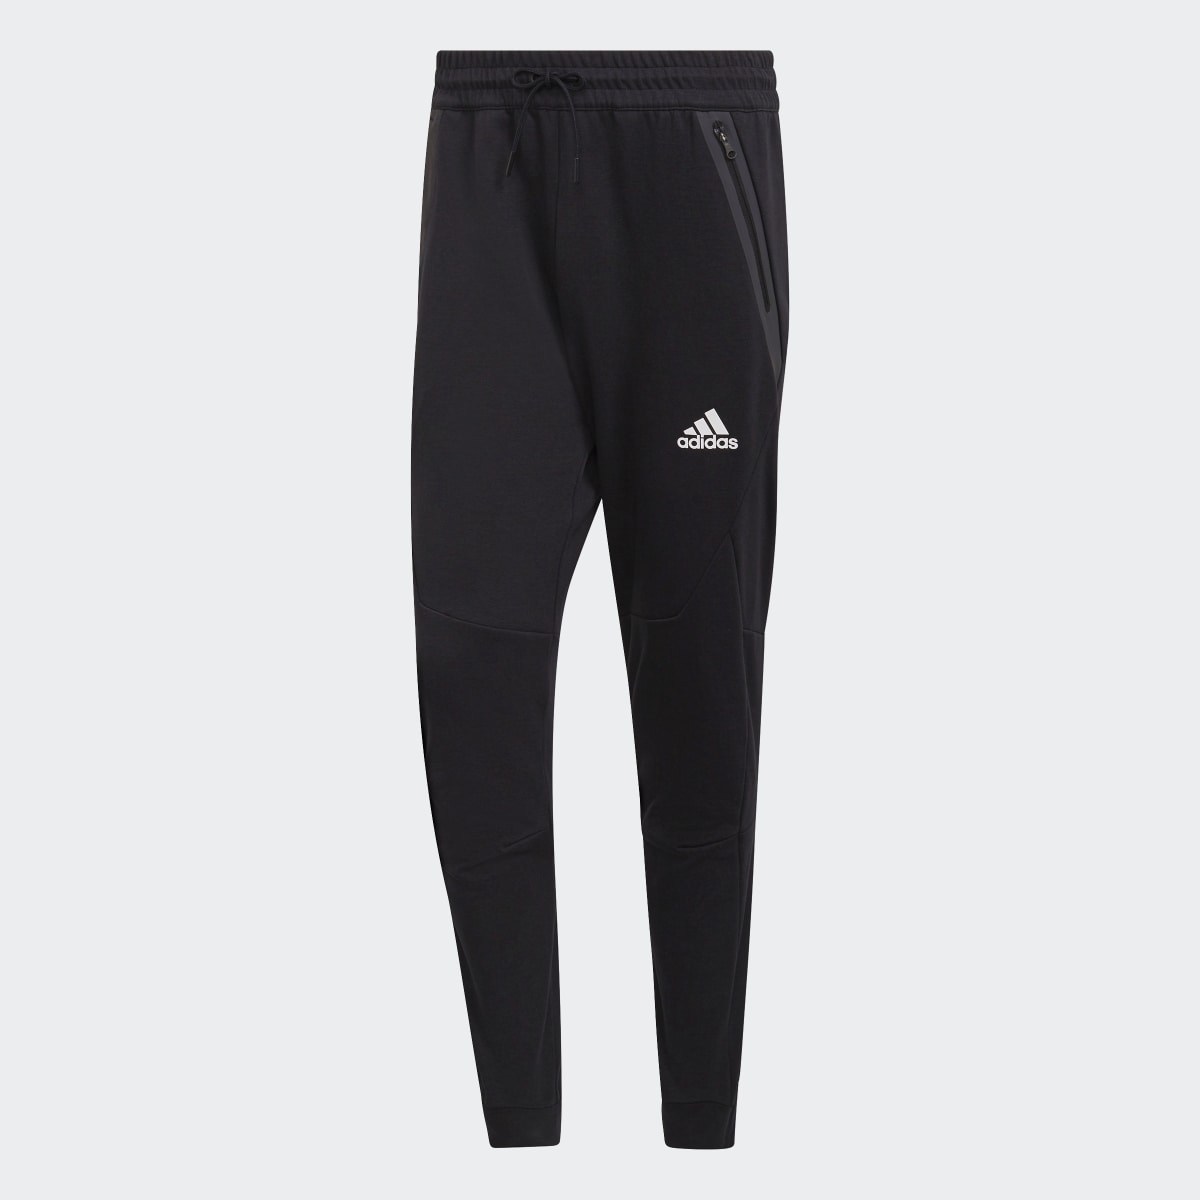 Adidas Designed for Gameday Pants. 4